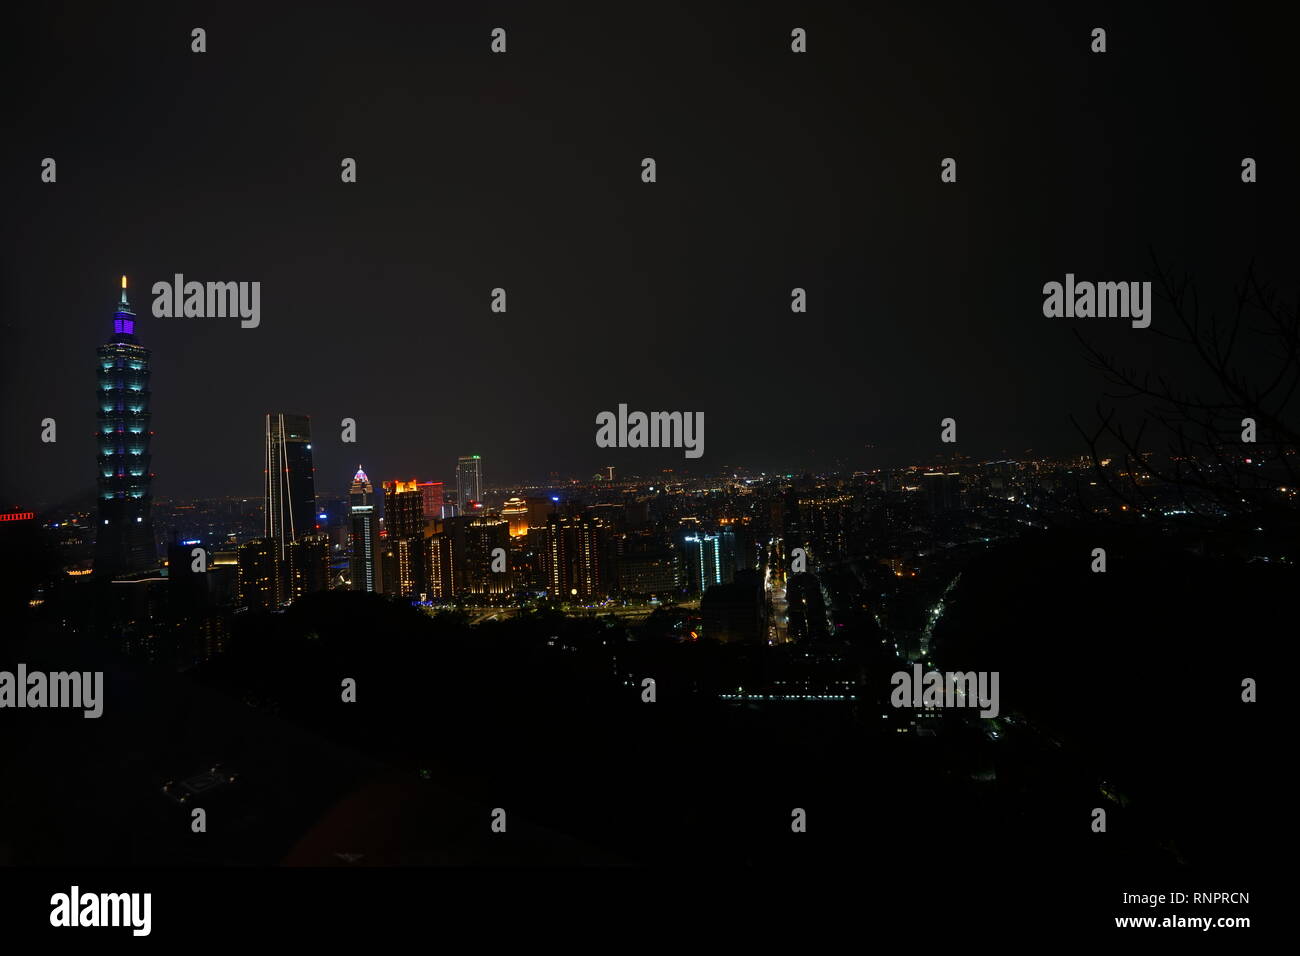 The aerial night view of the Taipei 101 from Elephant moutain (Xiangshan) in Taiwan. The concept of friendly and convenient lifestyle for real estate. Stock Photo